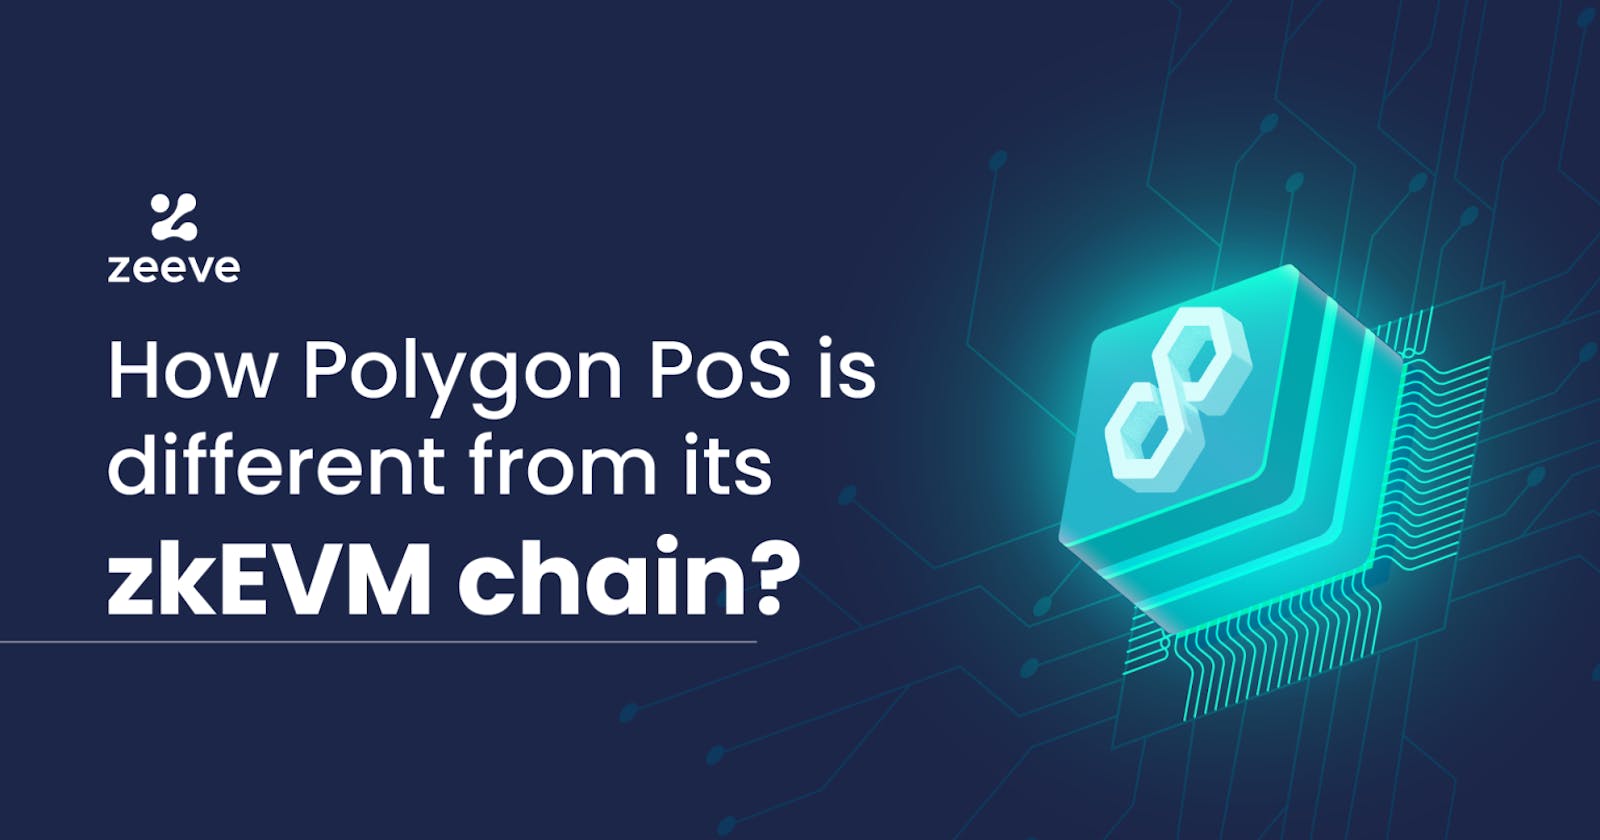 How Polygon PoS is different from its zkEVM chain?